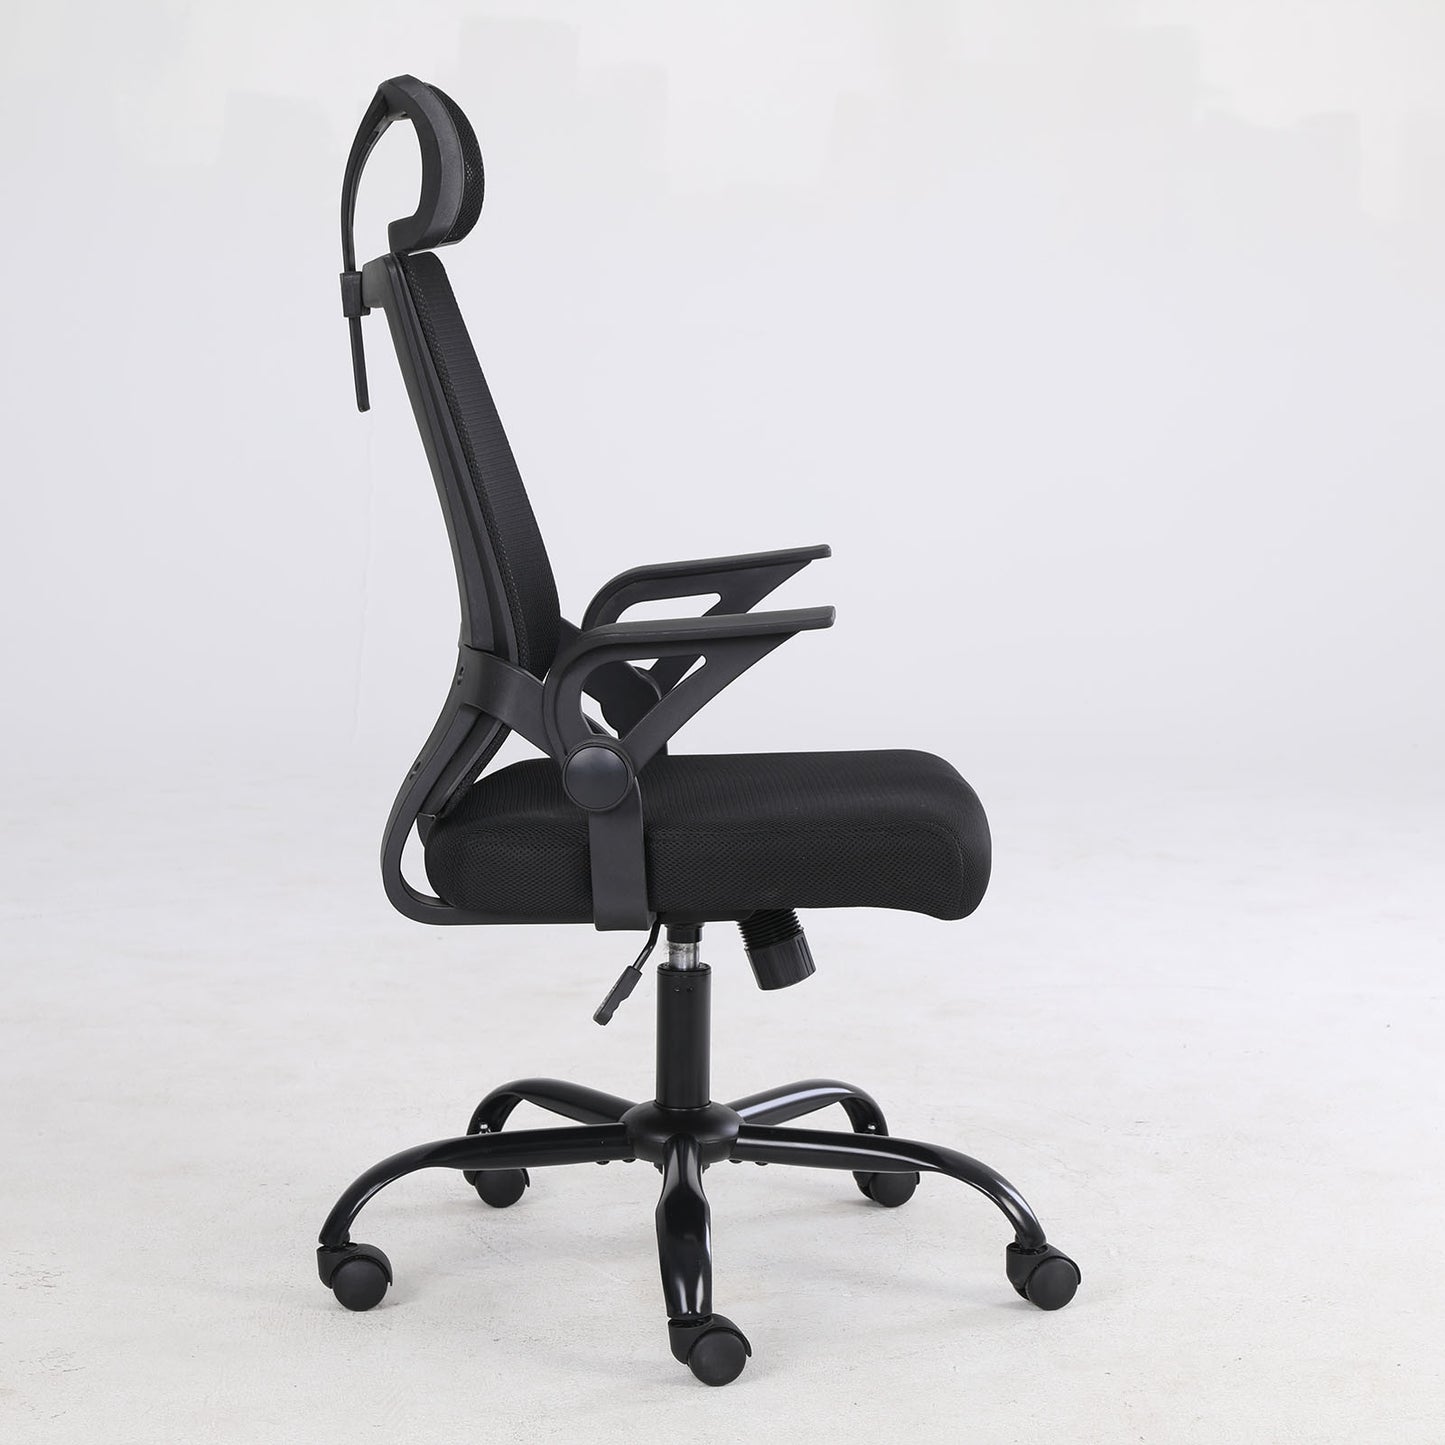 Ergonomic mesh executive office chair, computer chair with lumbar support and adjustable armrest, comfortable work desk and chair, suitable for conference office and family (black)